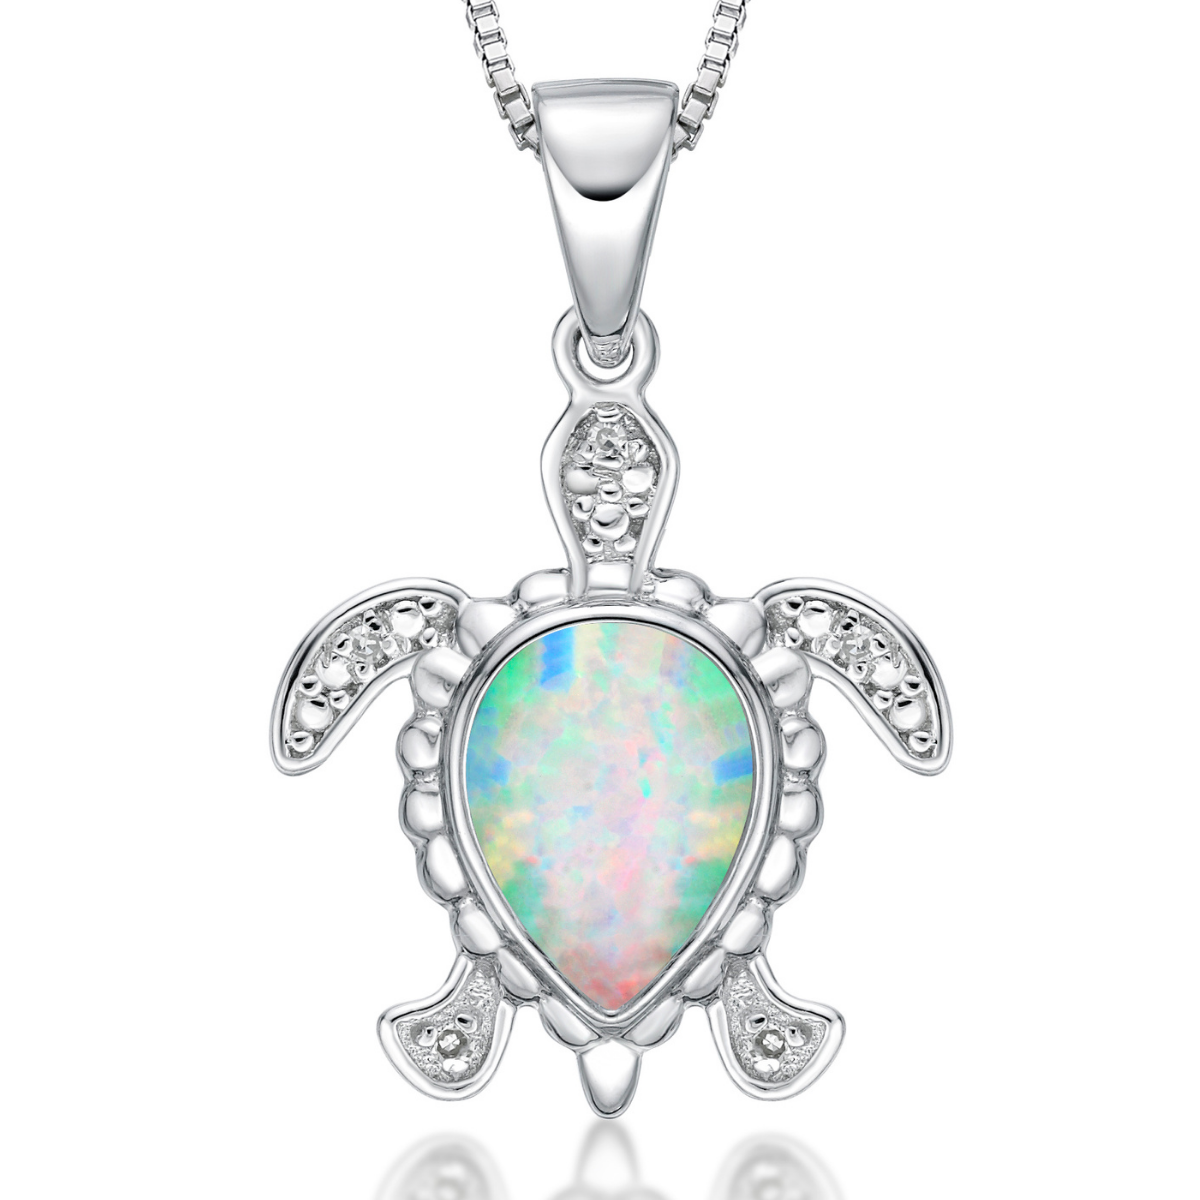 Lavari Jewelers Women's Created White Opal Turtle Diamond Pendant with Lobster Clasp, Sterling Silver, .015 Cttw, 18 Inch Cable Chain